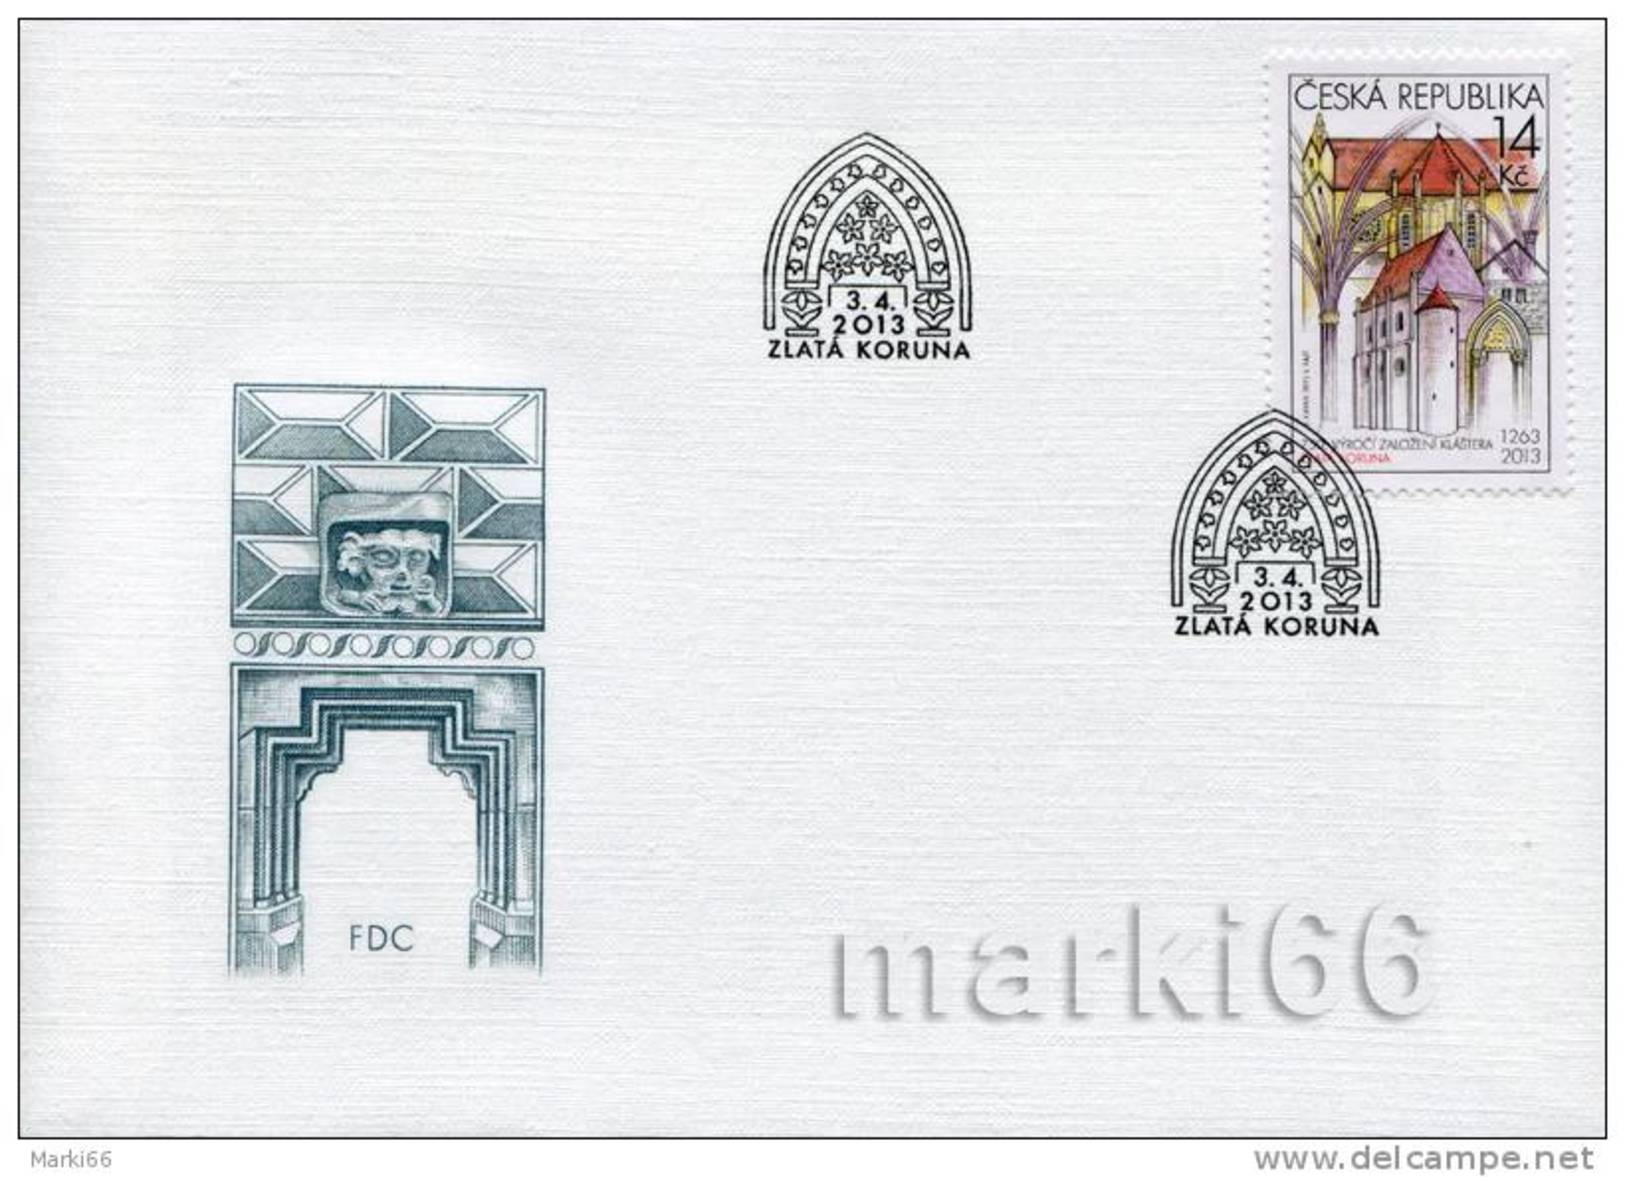 Czech Republic - 2013 - Beauties Of Our Country - 750th Anniversary Of Zlata Koruna Monastery - FDC - FDC